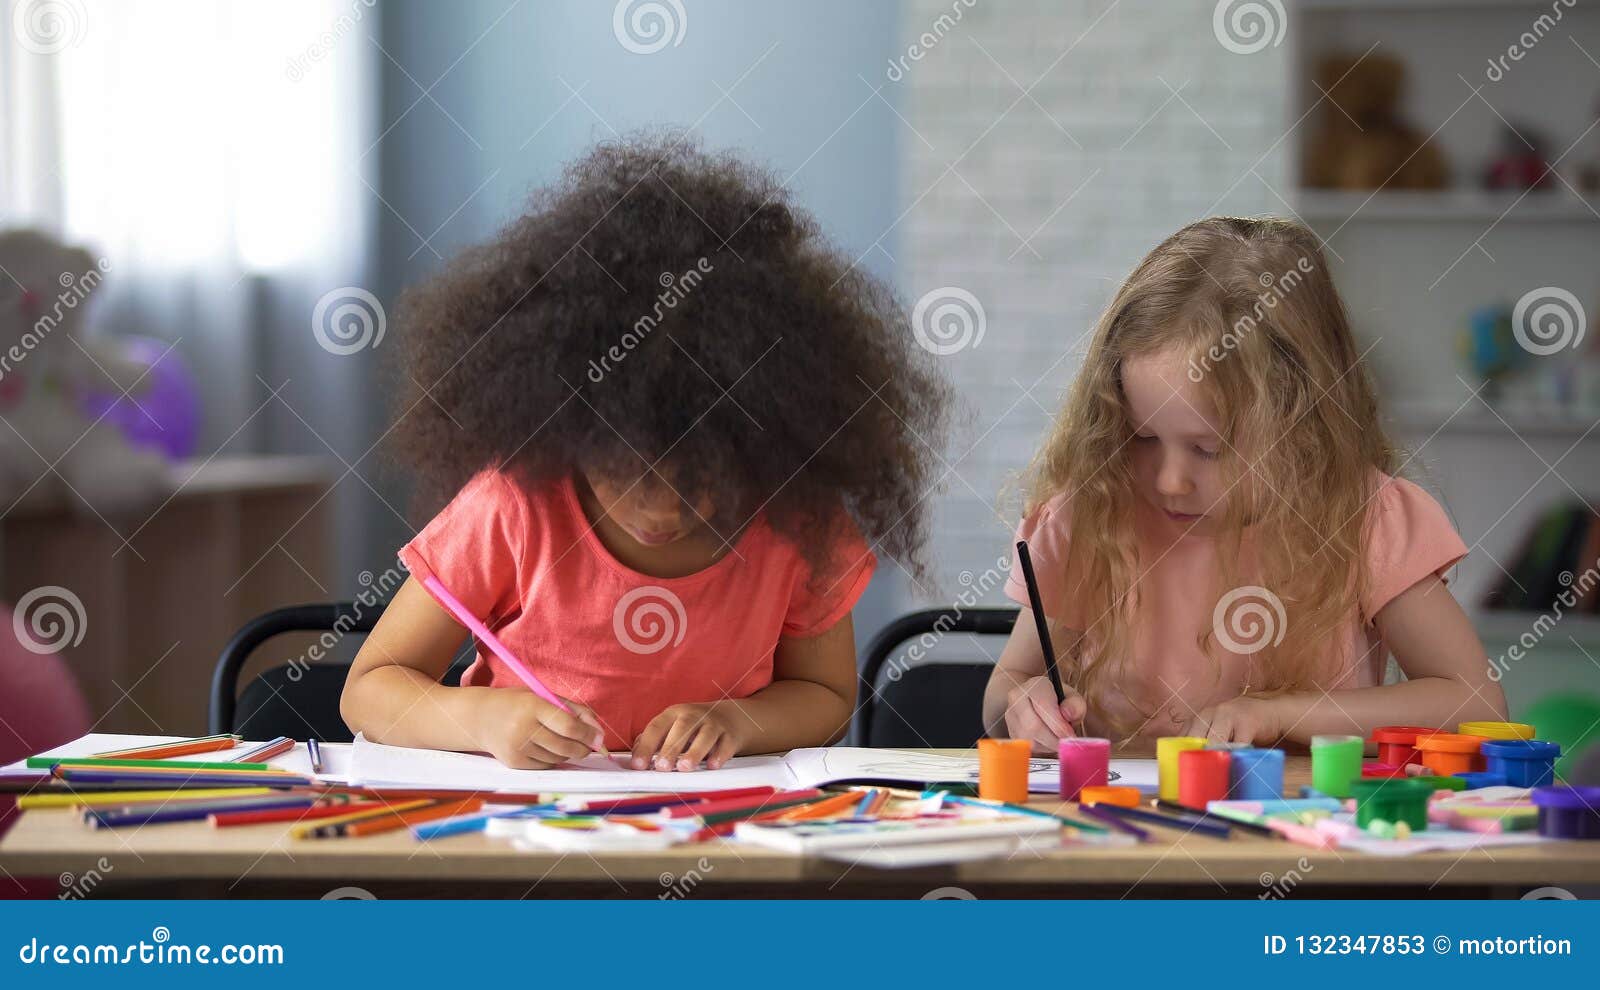 two multi-racial girls drawing with colorful pencils in early education center